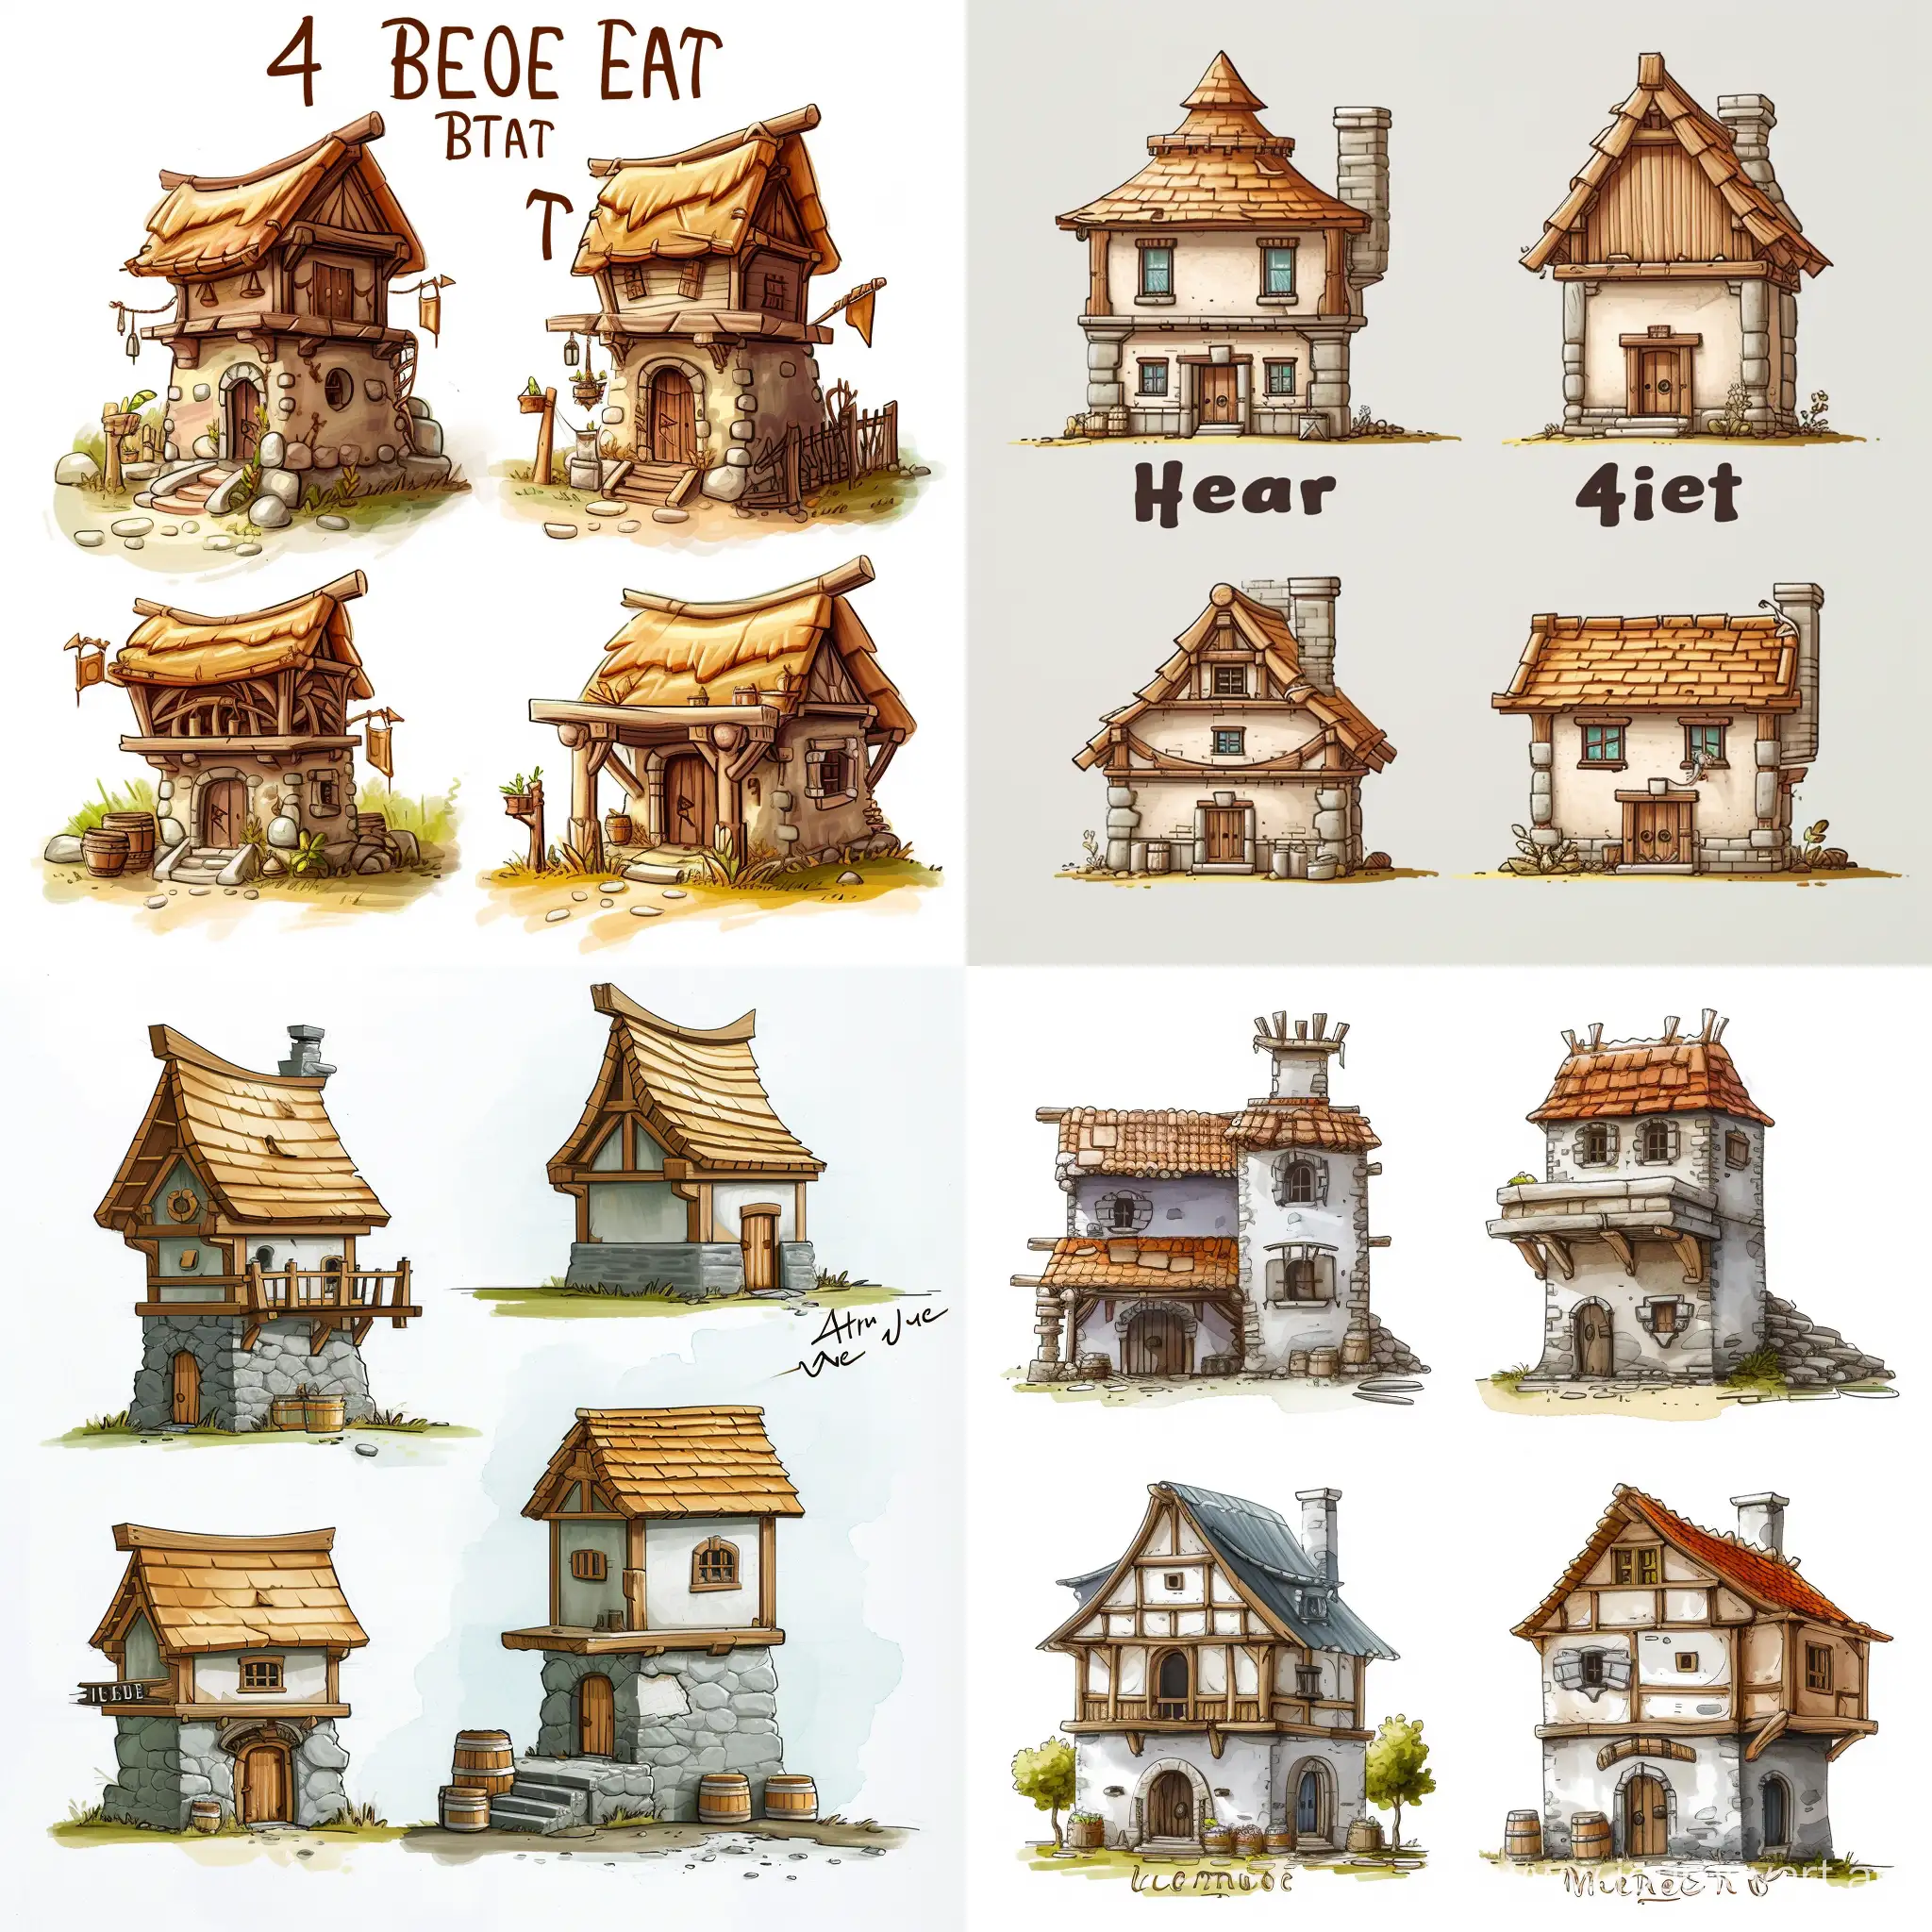 There are 4 options for improving buildings for the game from the first to the 4th level in order of increasing levels. show the development from the simplest to the most complex building. draw in the same hand paint style